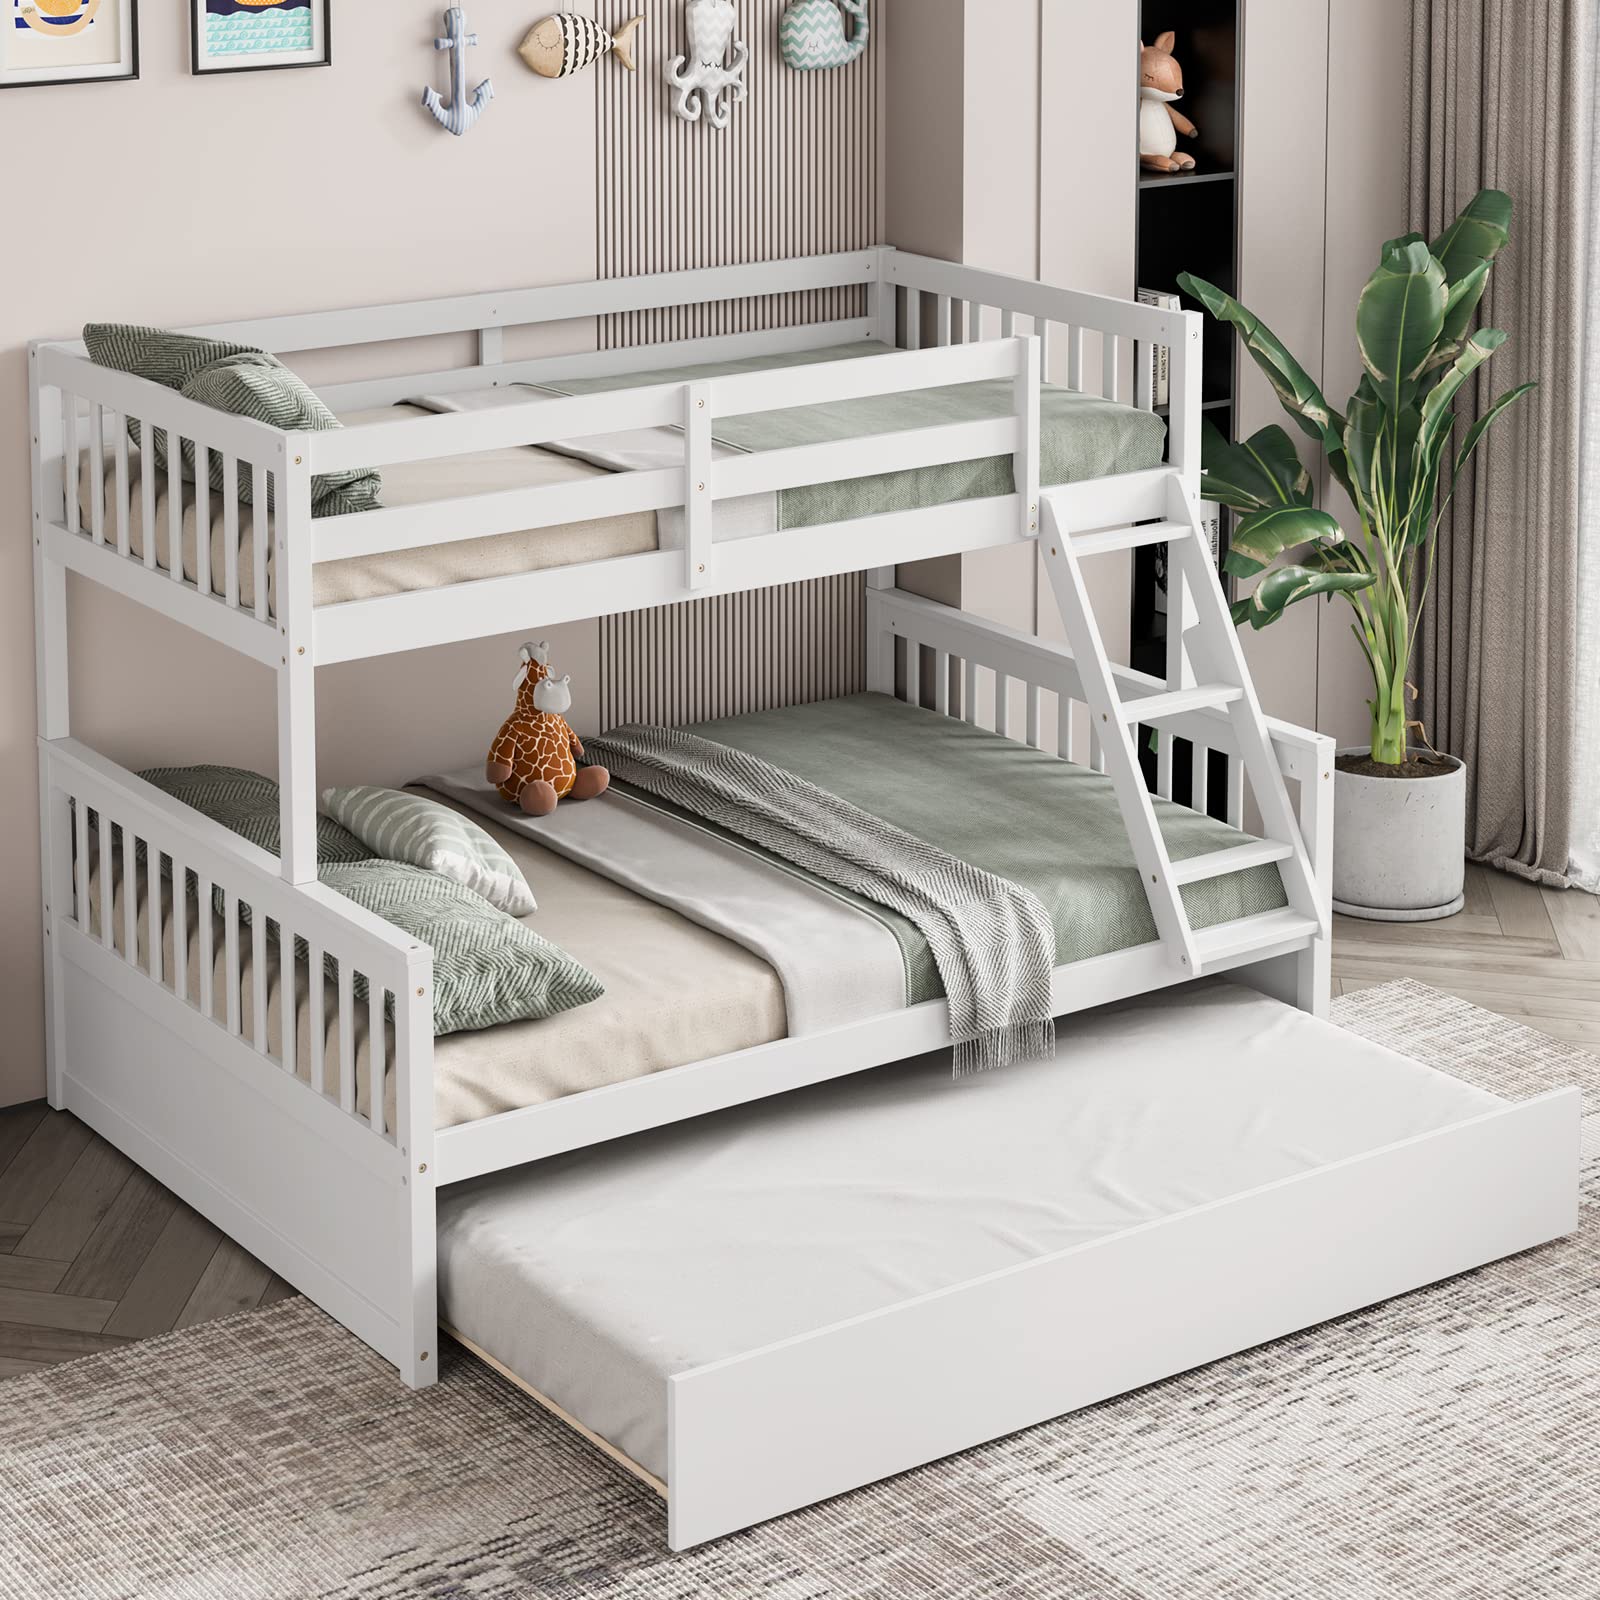 Twin Over Full Bunk Bed with Trundle - Giantex